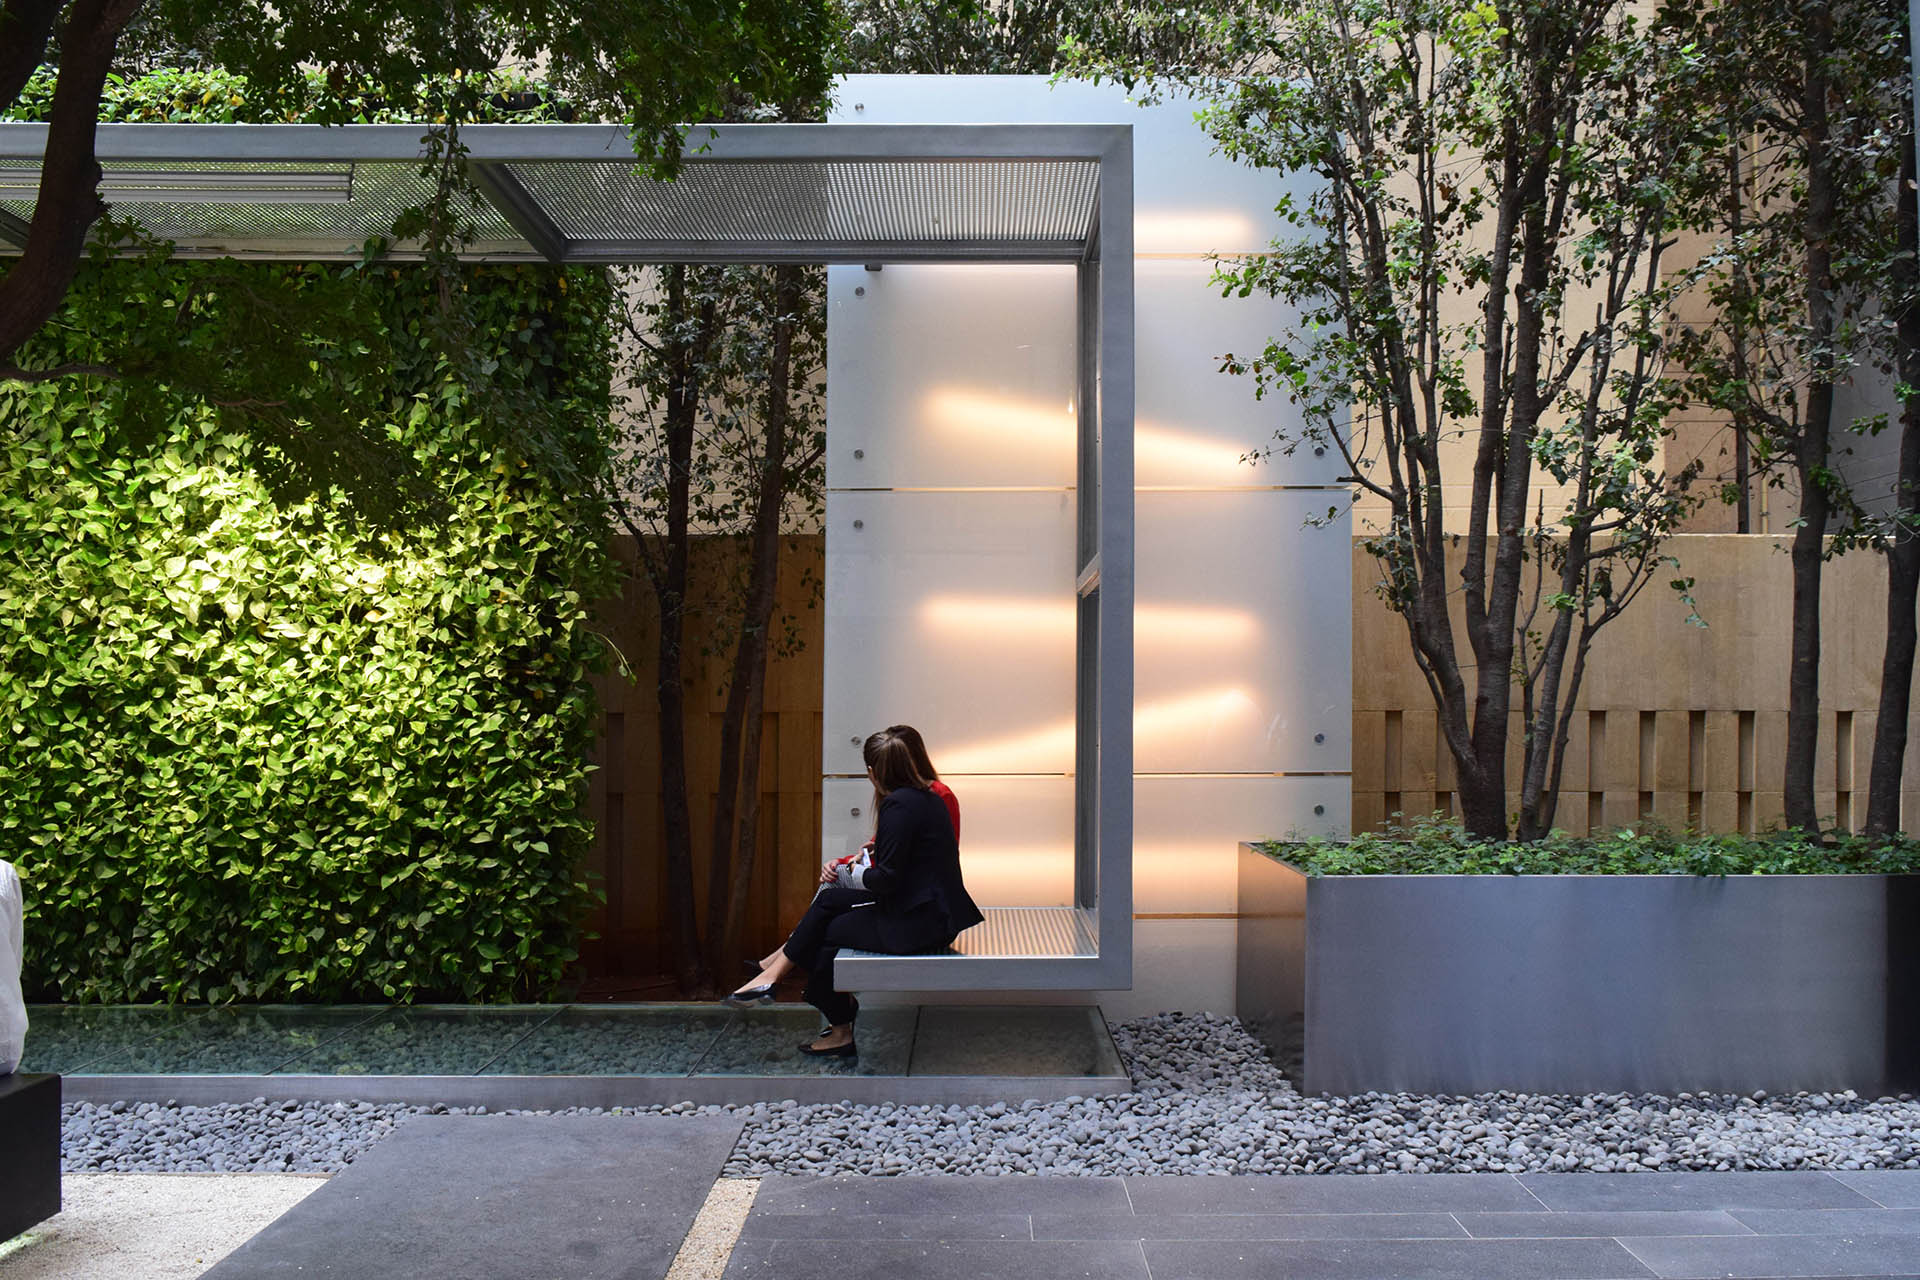 <p>The garden seems to filter between the external public space and the internal private enclosure through a translucent landscape treated buffer zone, this harmonious and appealing space invites users in and allows them to contemplate and relax.</p>